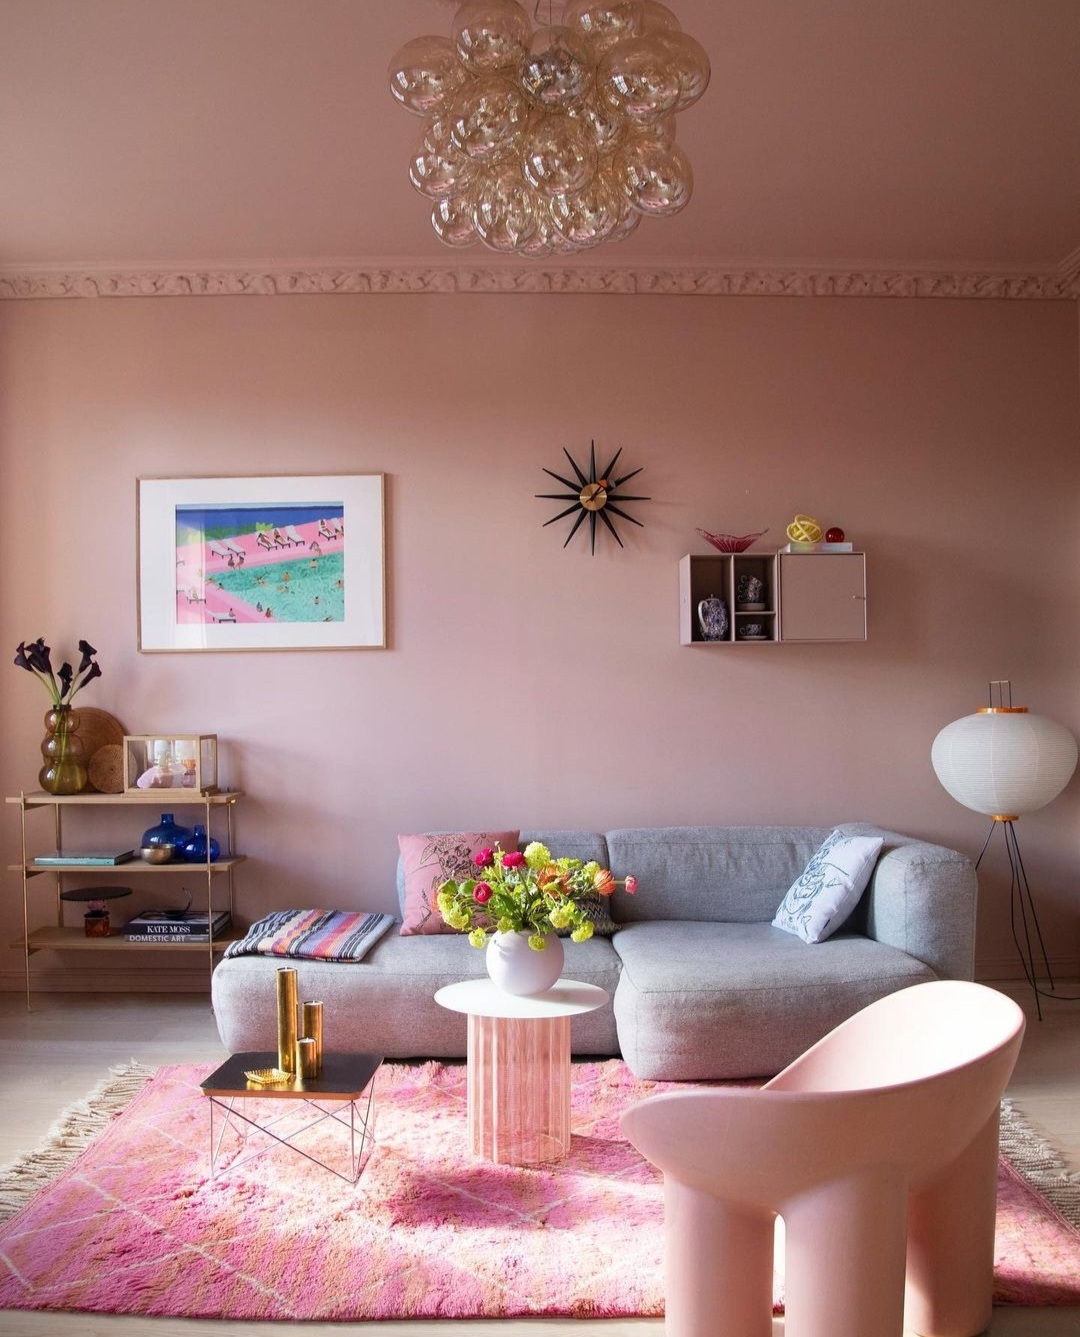 Blush pink and grey living room, how to pull off the look